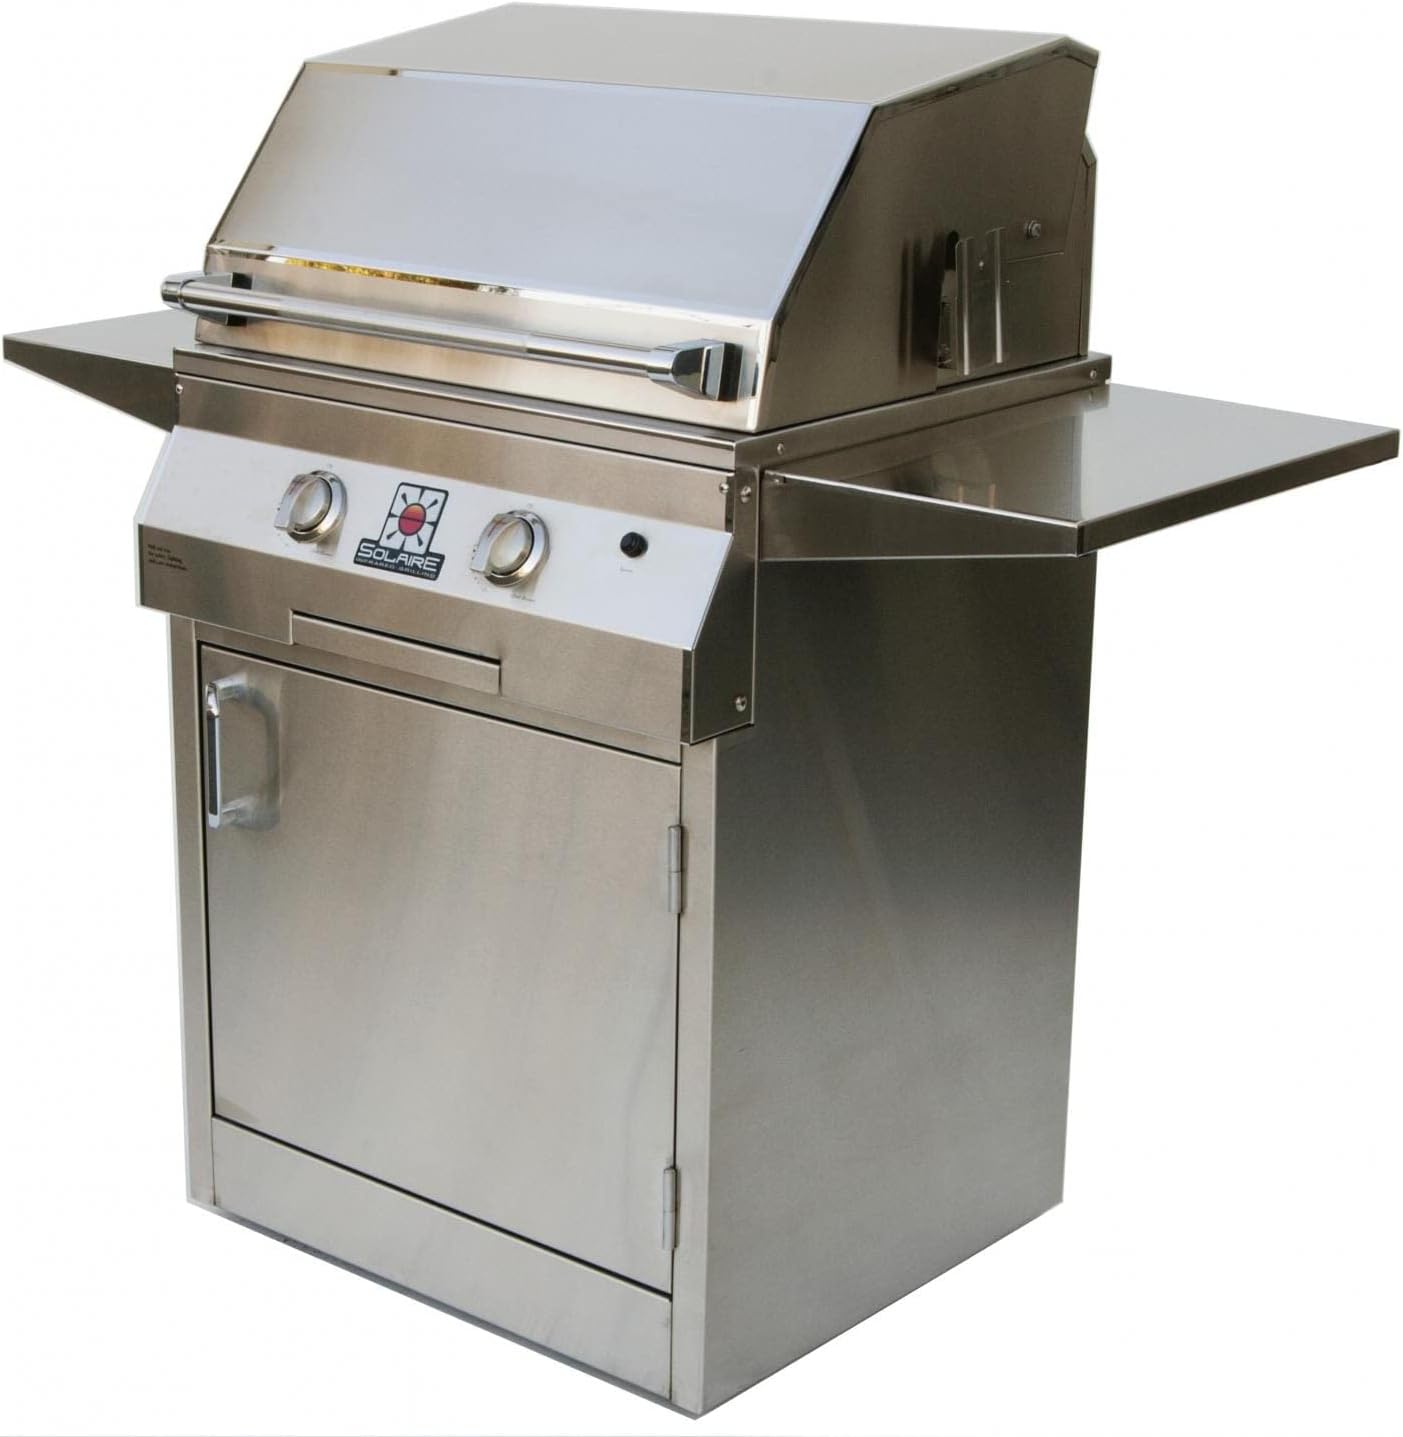 27-Inch Deluxe Infrared Propane Grill on Square Cart, Stainless Steel - Deluxe Infrared Propane Grill Review